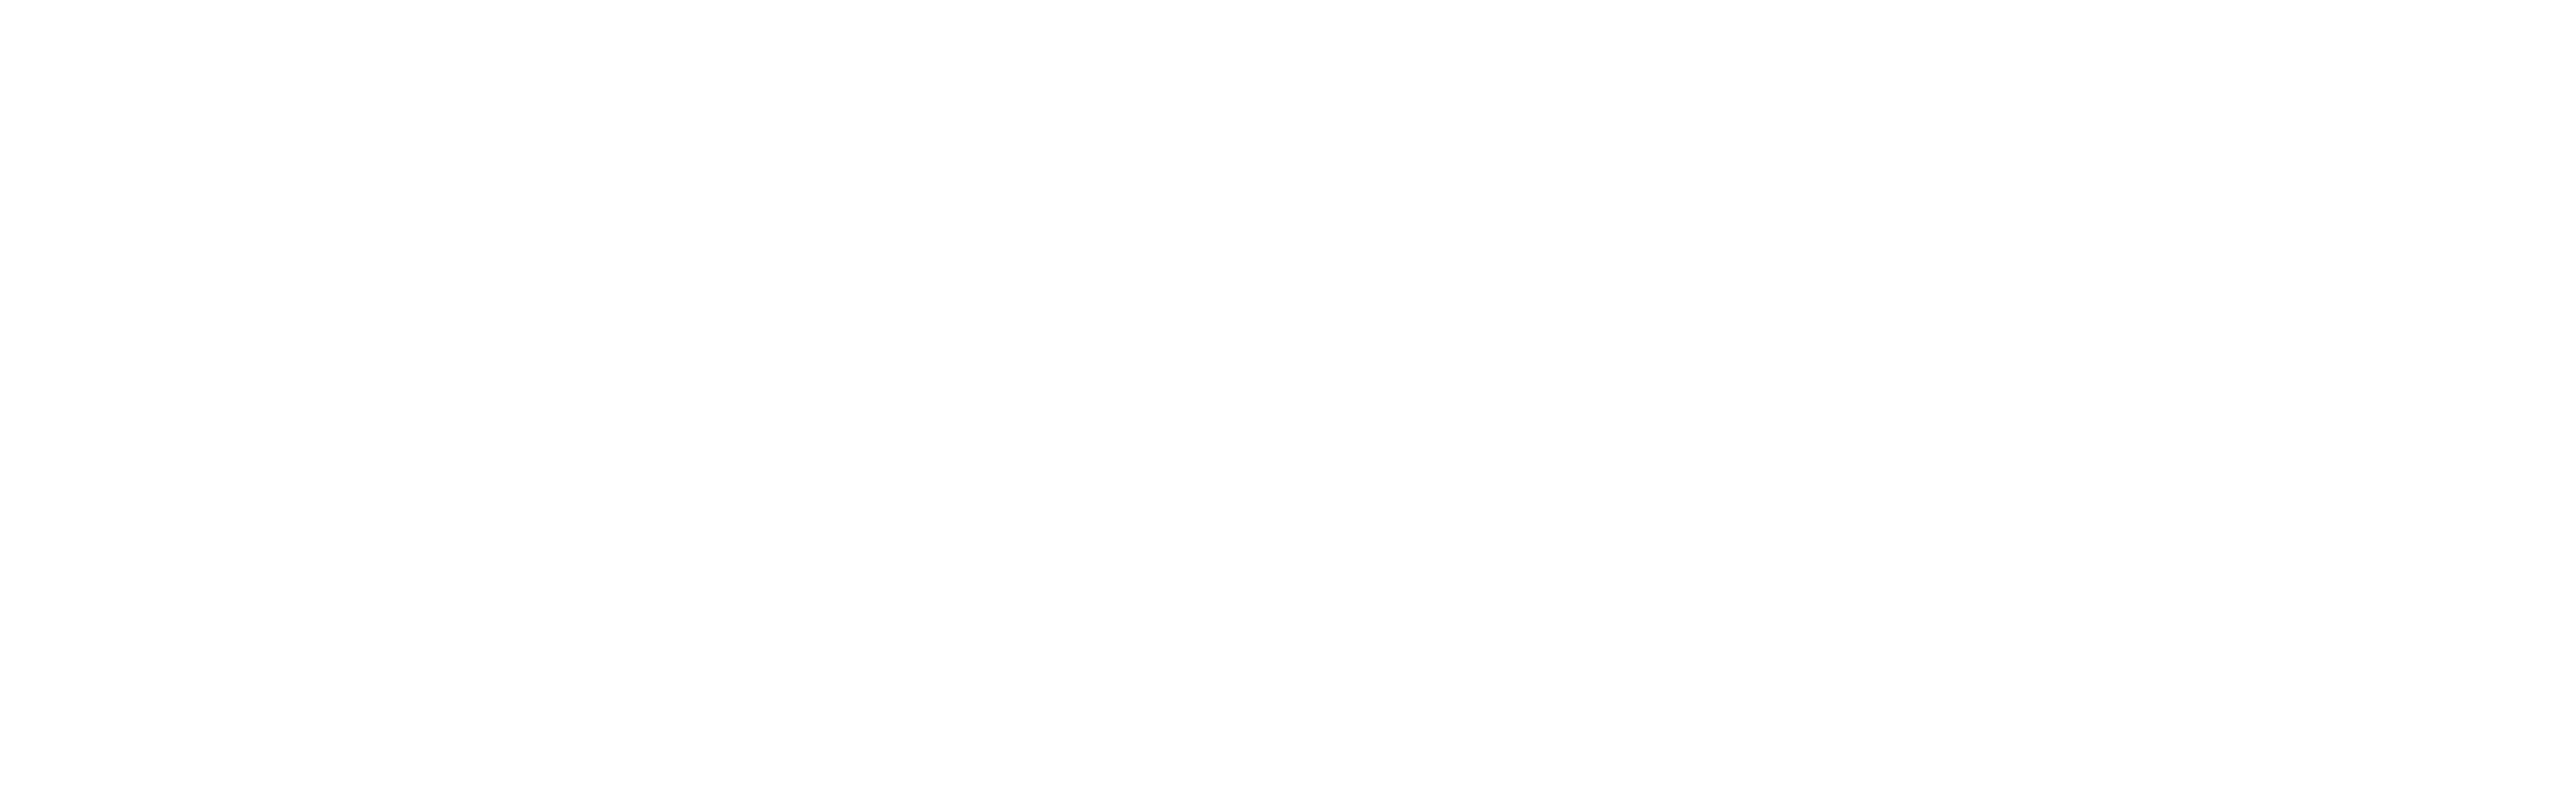 powered by CampusEd®